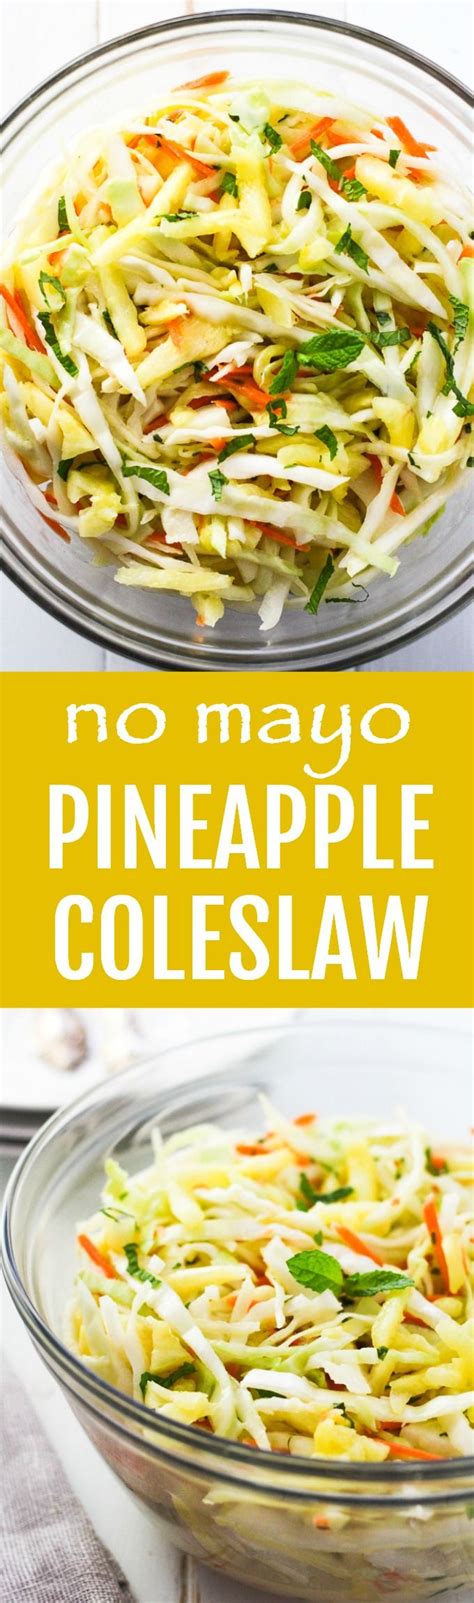 This Healthy Pineapple Coleslaw Is Crunchy And Refreshing Its Made